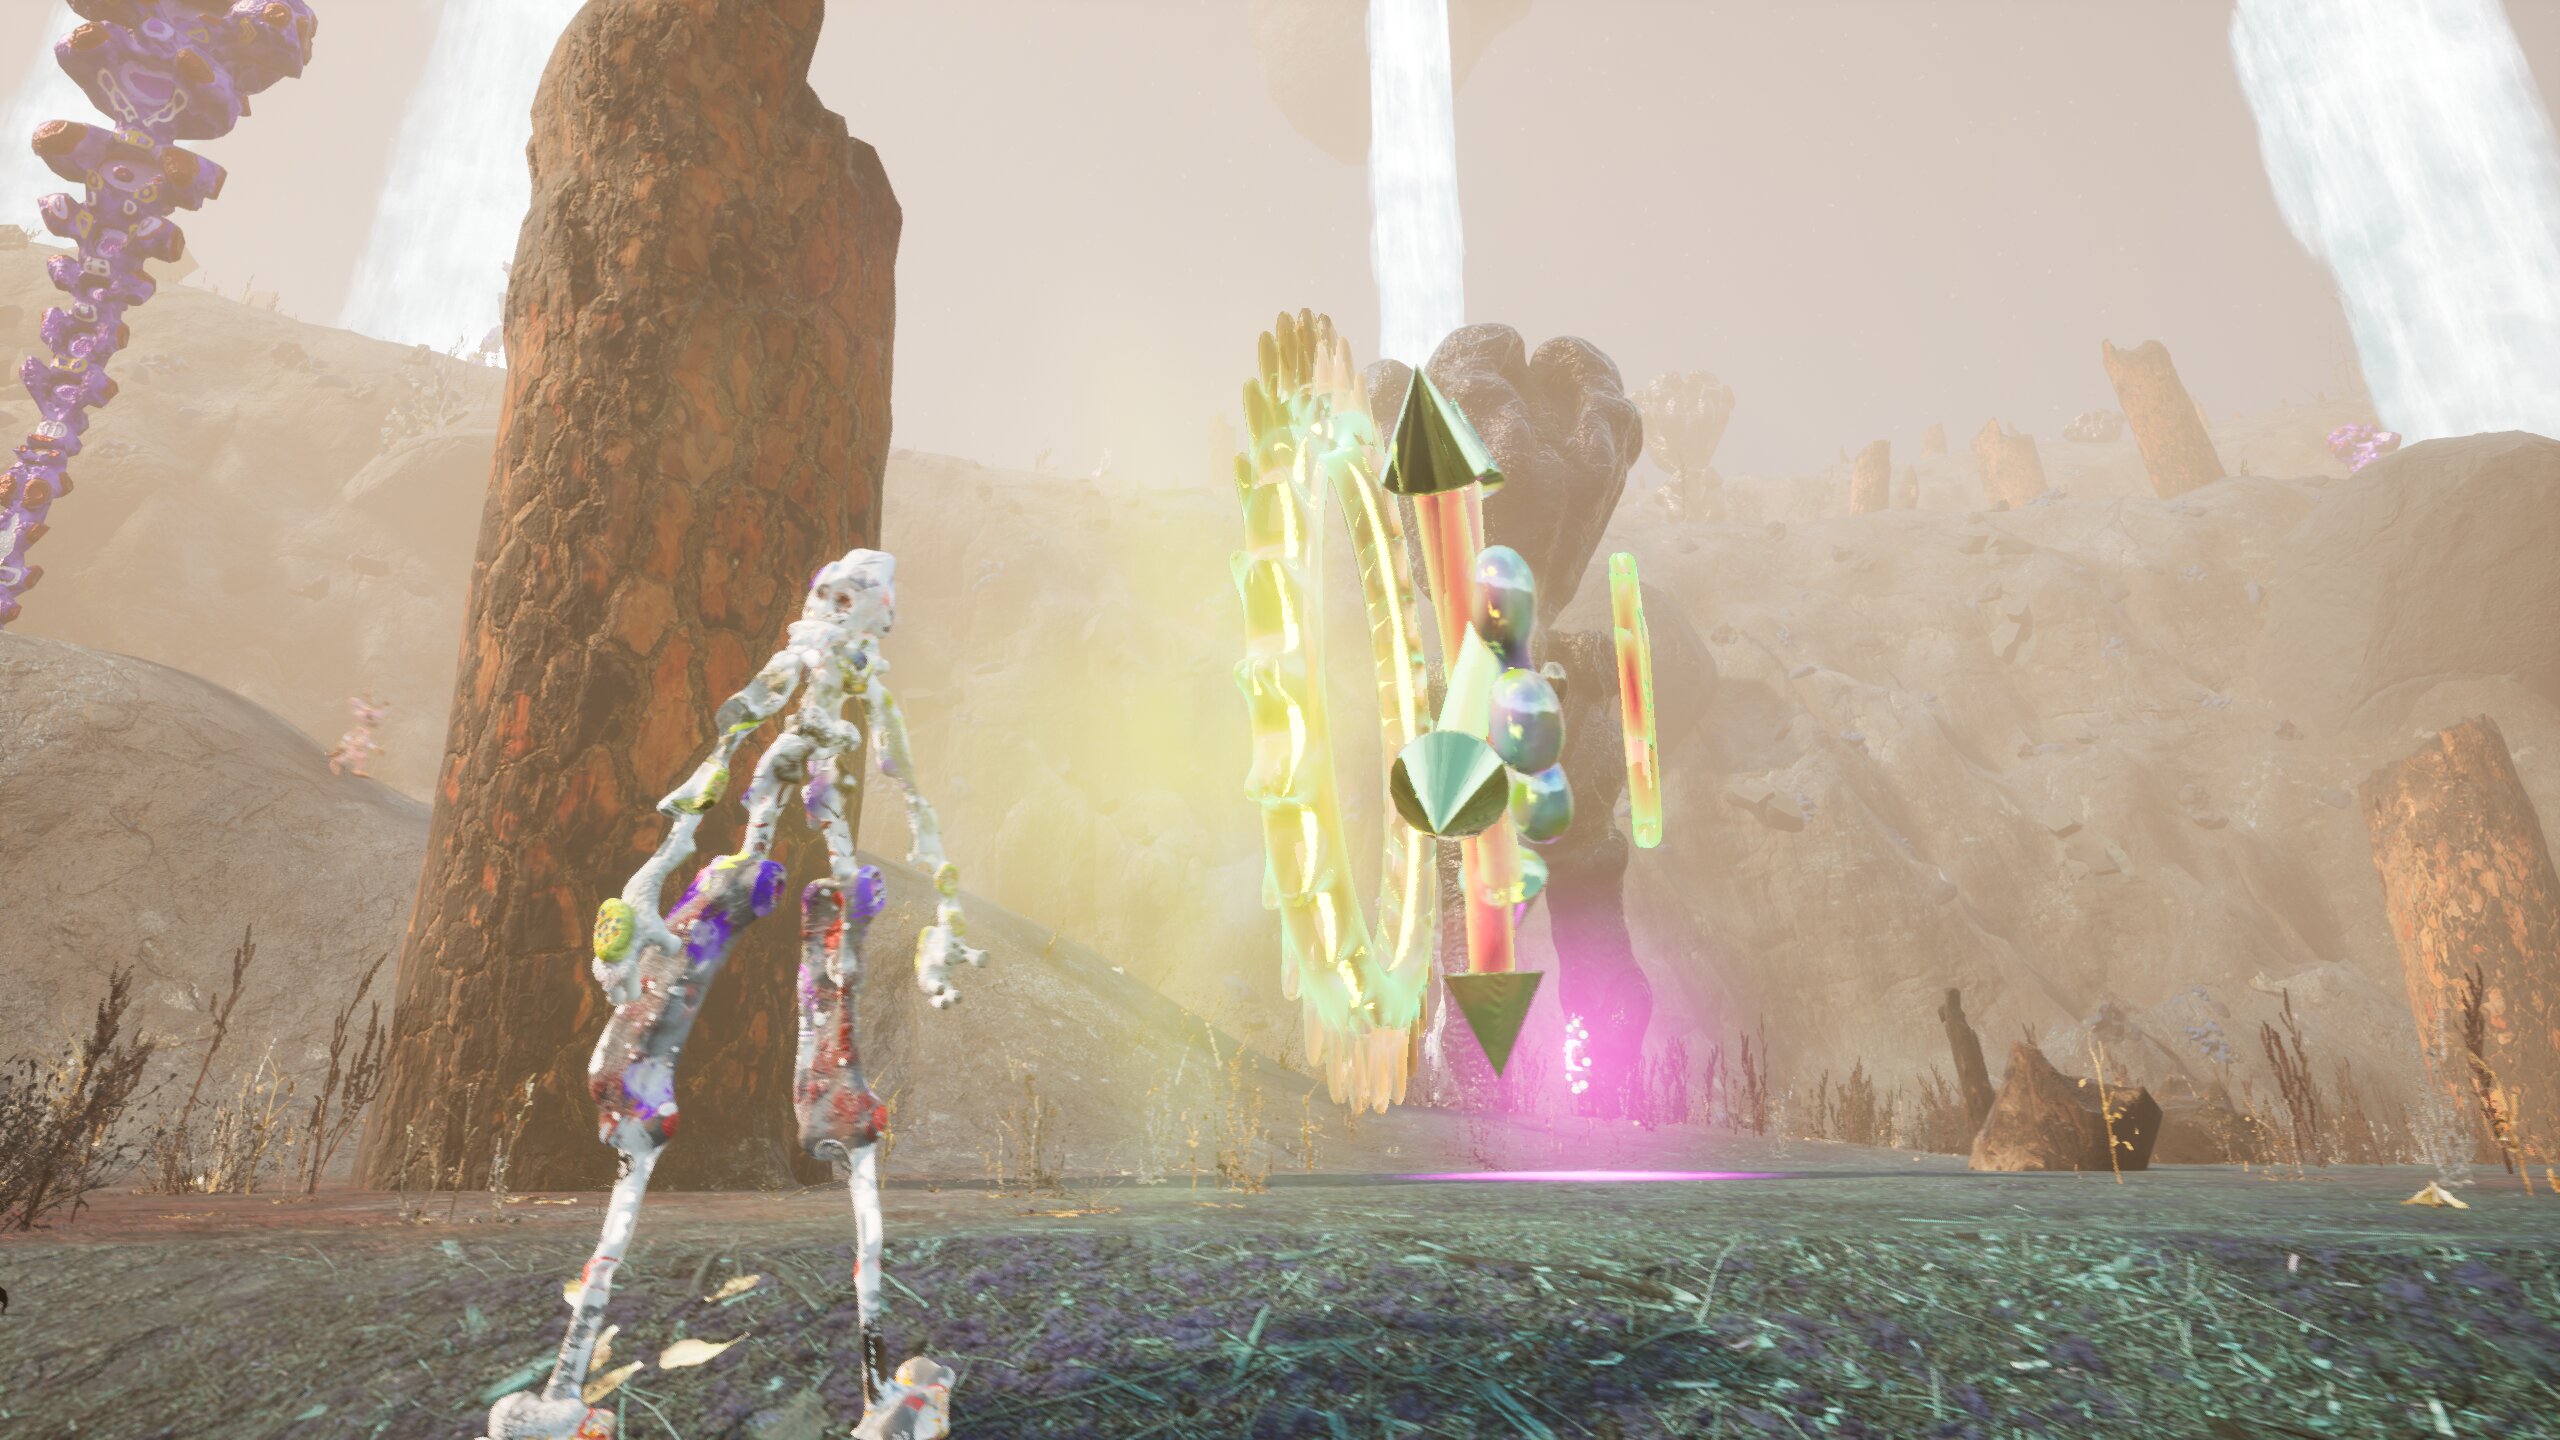 A screenshot from a video game shows the player avatar standing in a canyon. In the background there are rocky pillars and a glowing yellow portal